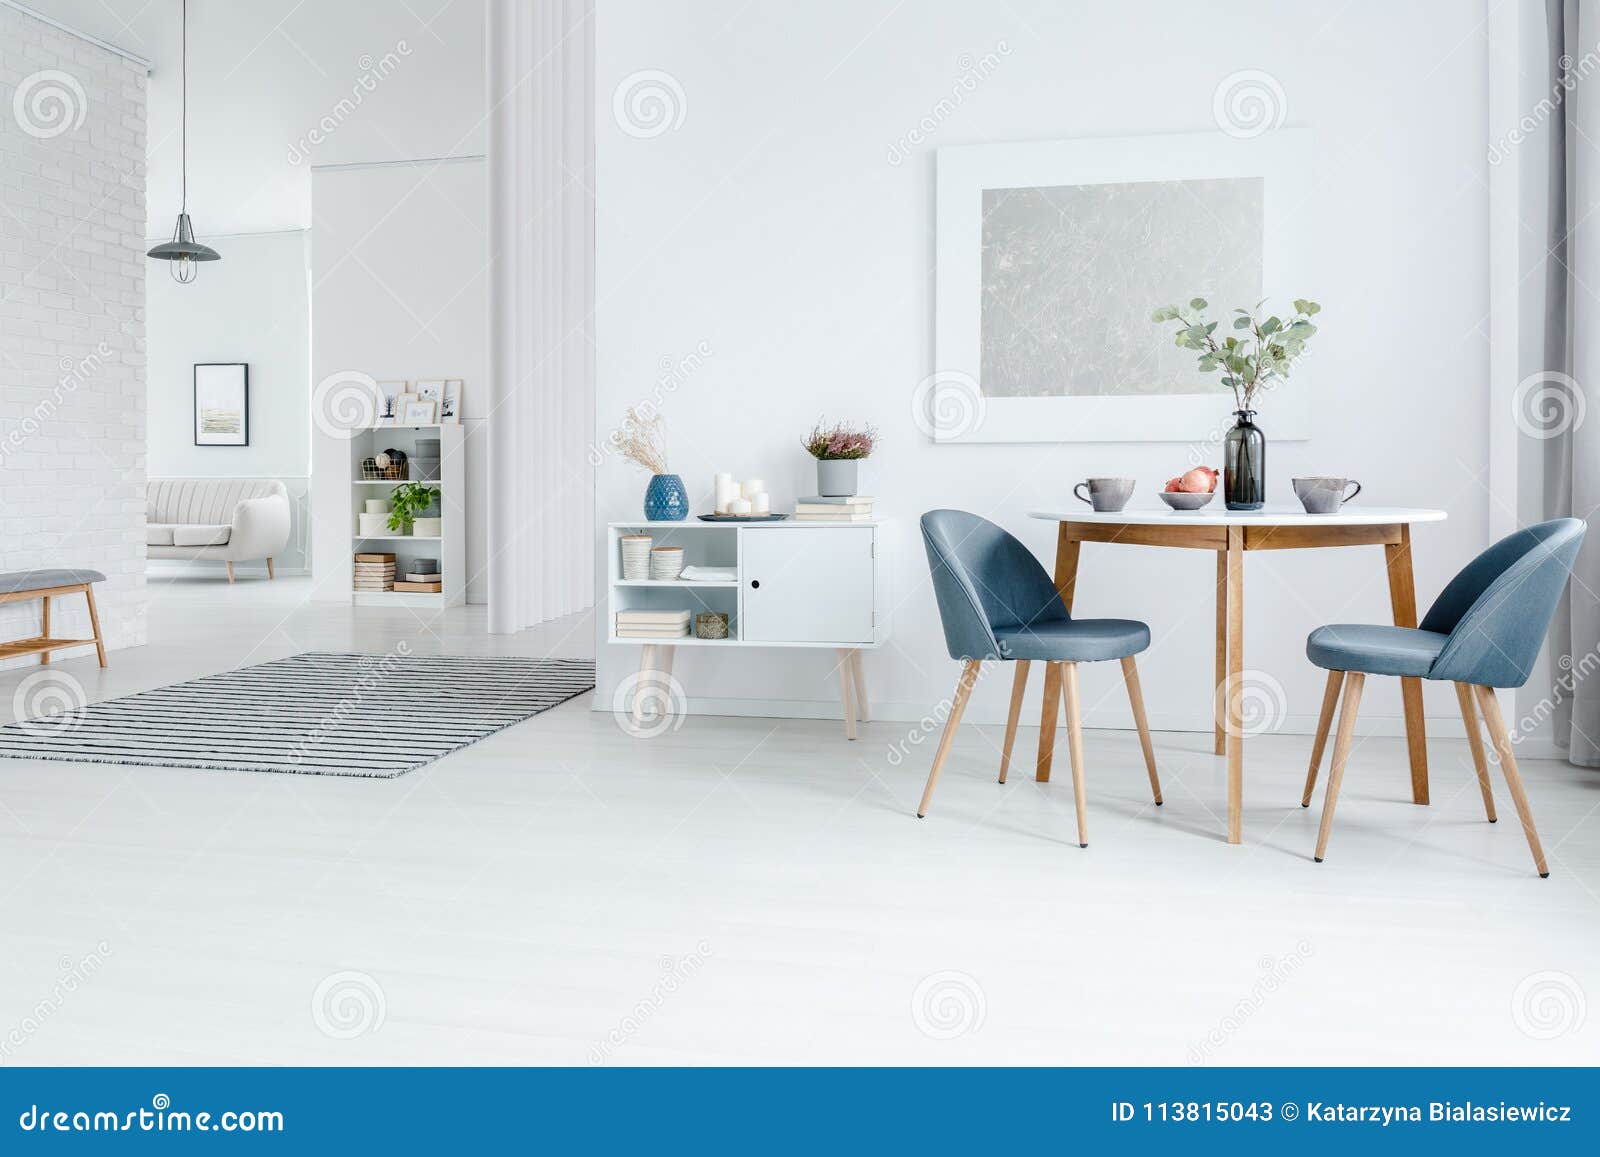 White Open Space Apartment Stock Image Image Of Design 113815043,Tiny Very Small Kitchen Design Indian Style